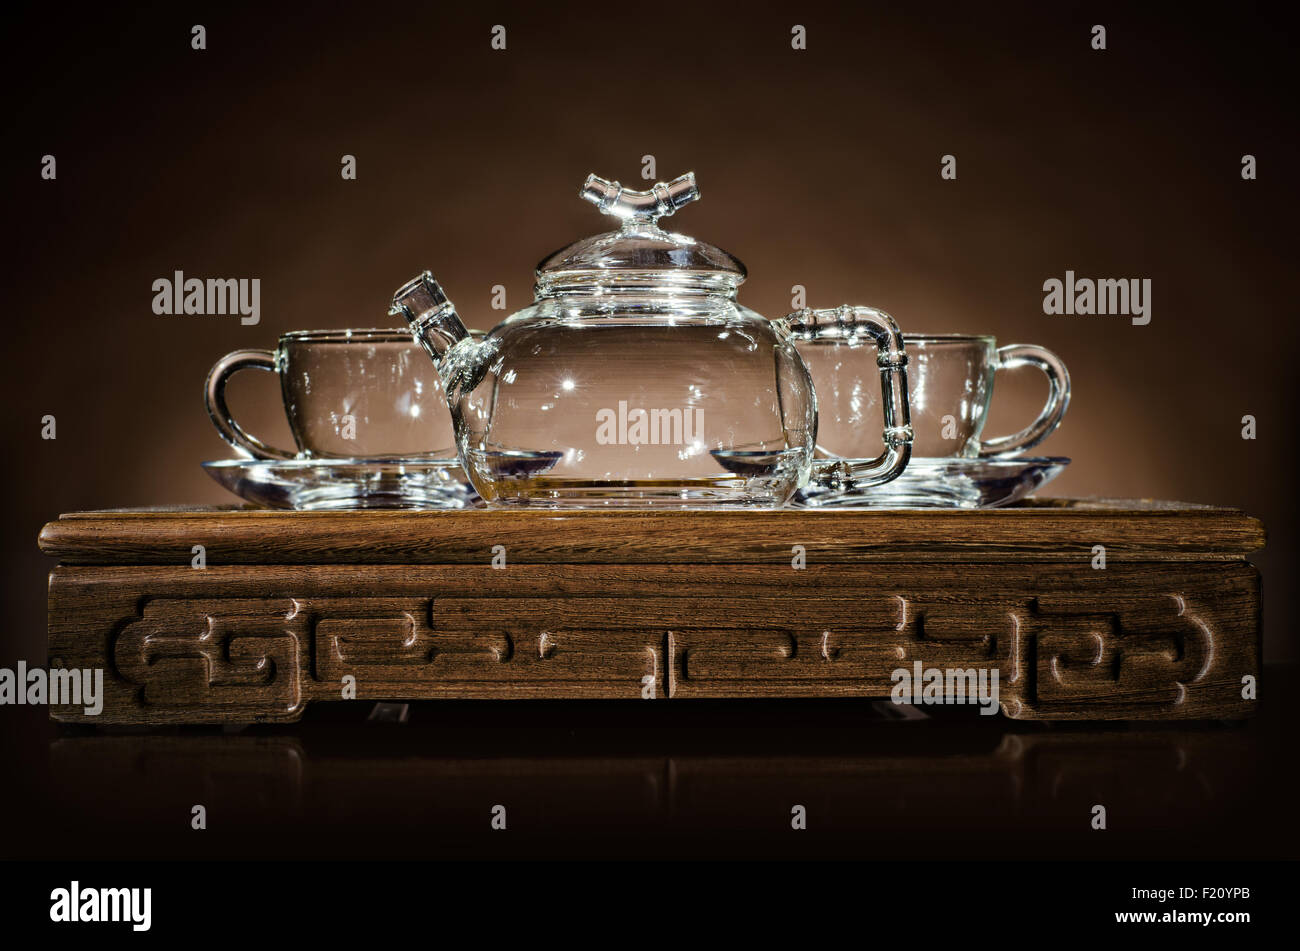 horizontal  photo  of the glass teapot with  cup on  wooden trivet, on dark background Stock Photo